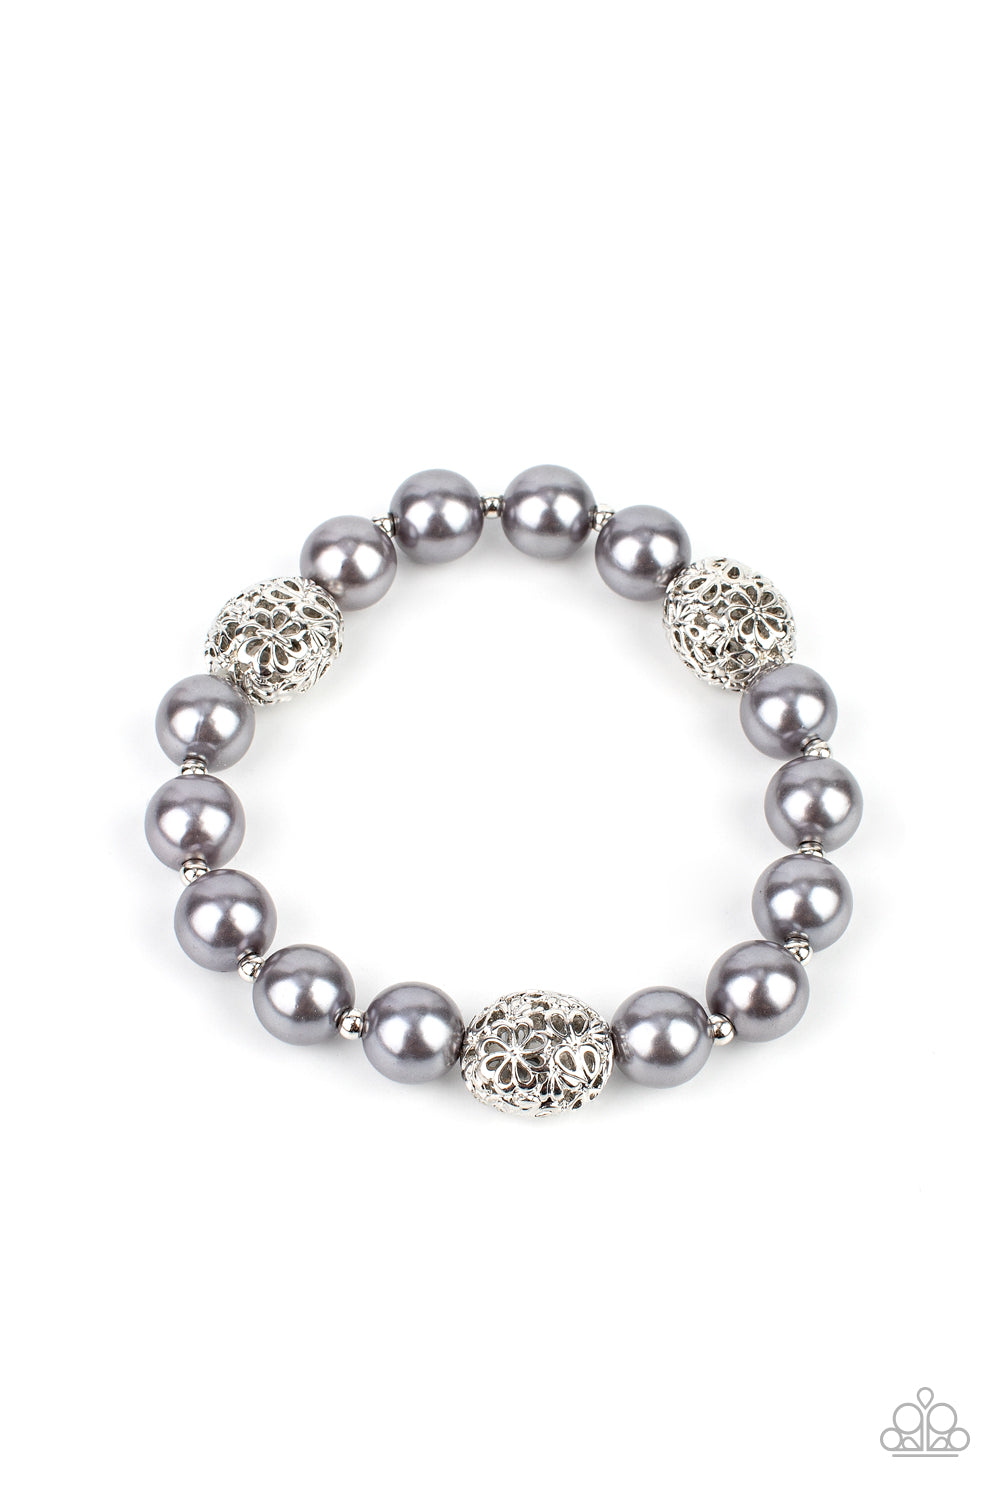 Paparazzi Upscale Whimsy - Silver Bracelet - A Finishing Touch Jewelry